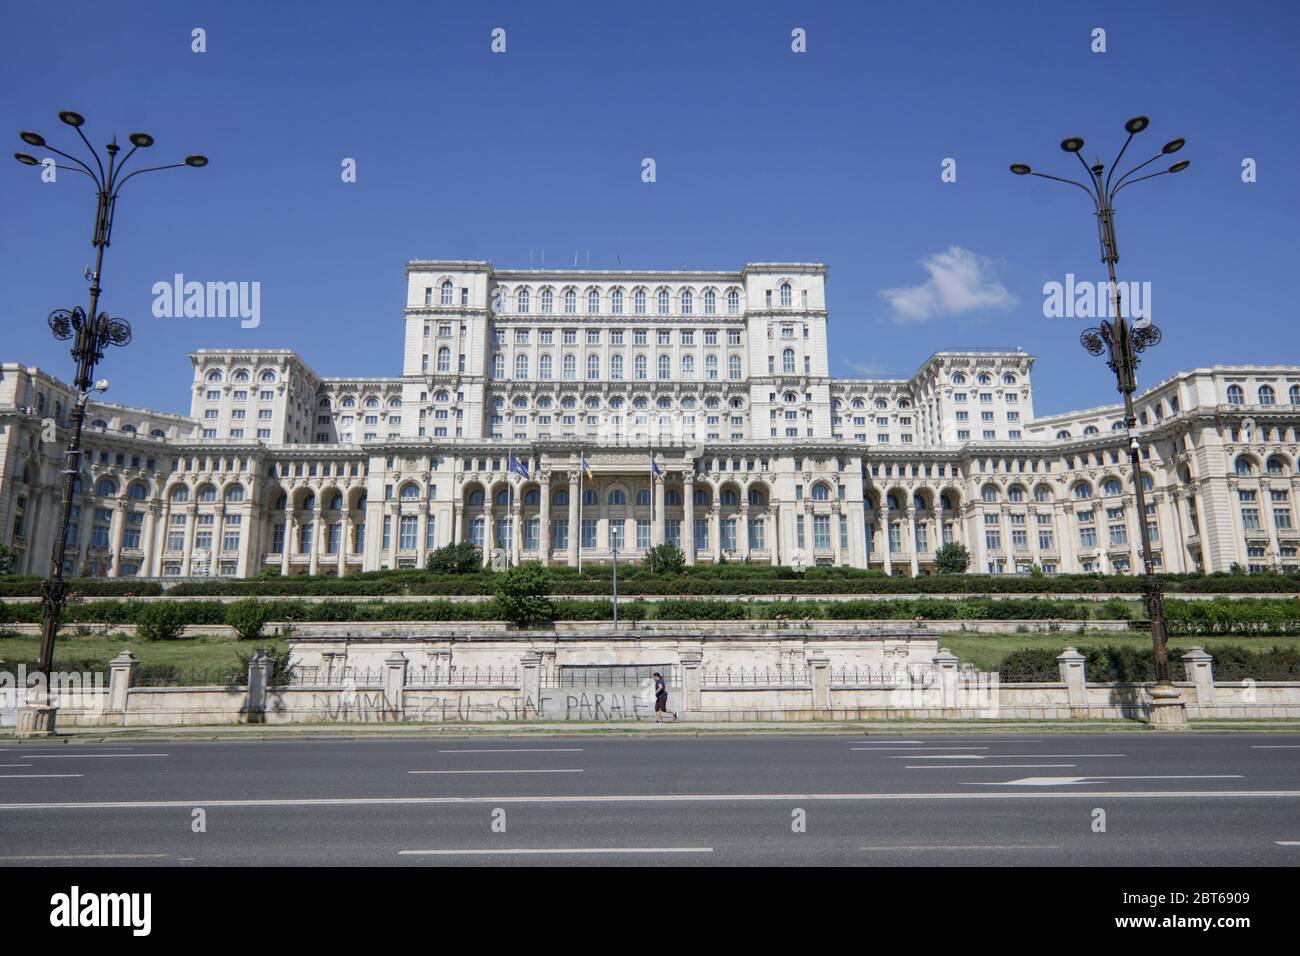 Bucharest, Romania - May 23, 2020: The Palace of Parliament building in Bucharest as seen from Piata Constitutiei (Constitution Square). Stock Photo